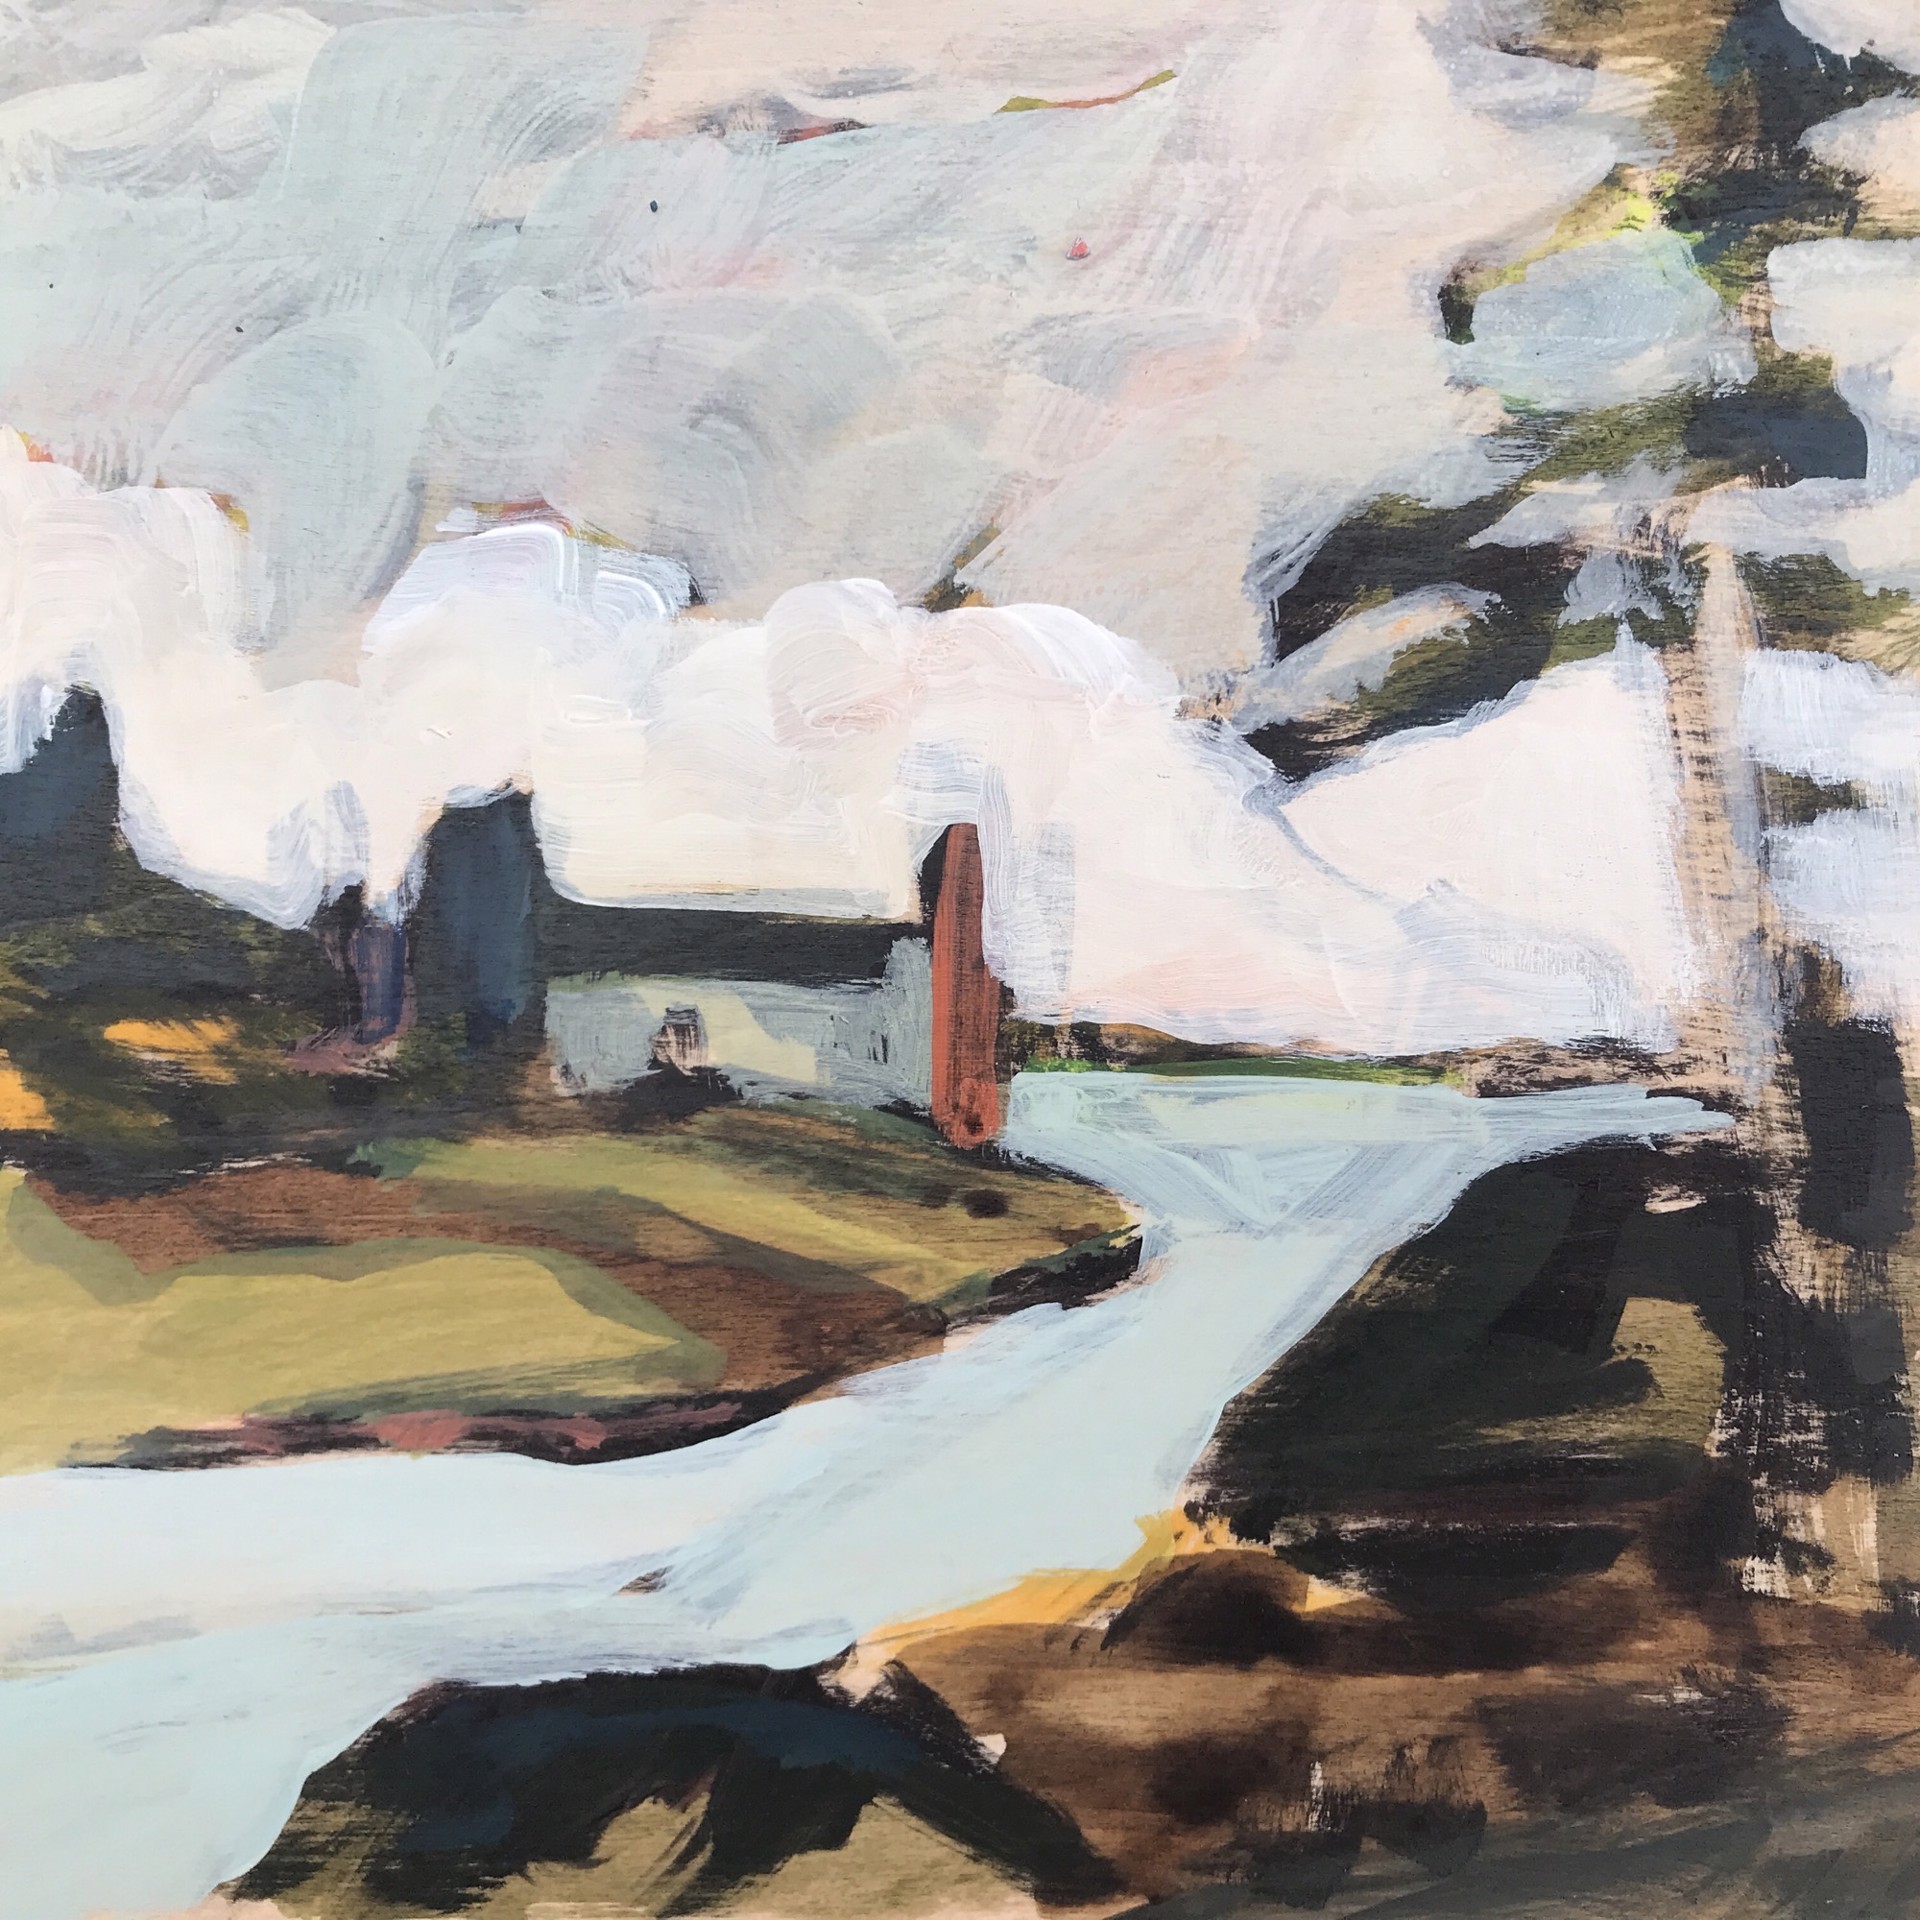 Fisherman's Cottage, Pine and Inlet by Rachael Van Dyke